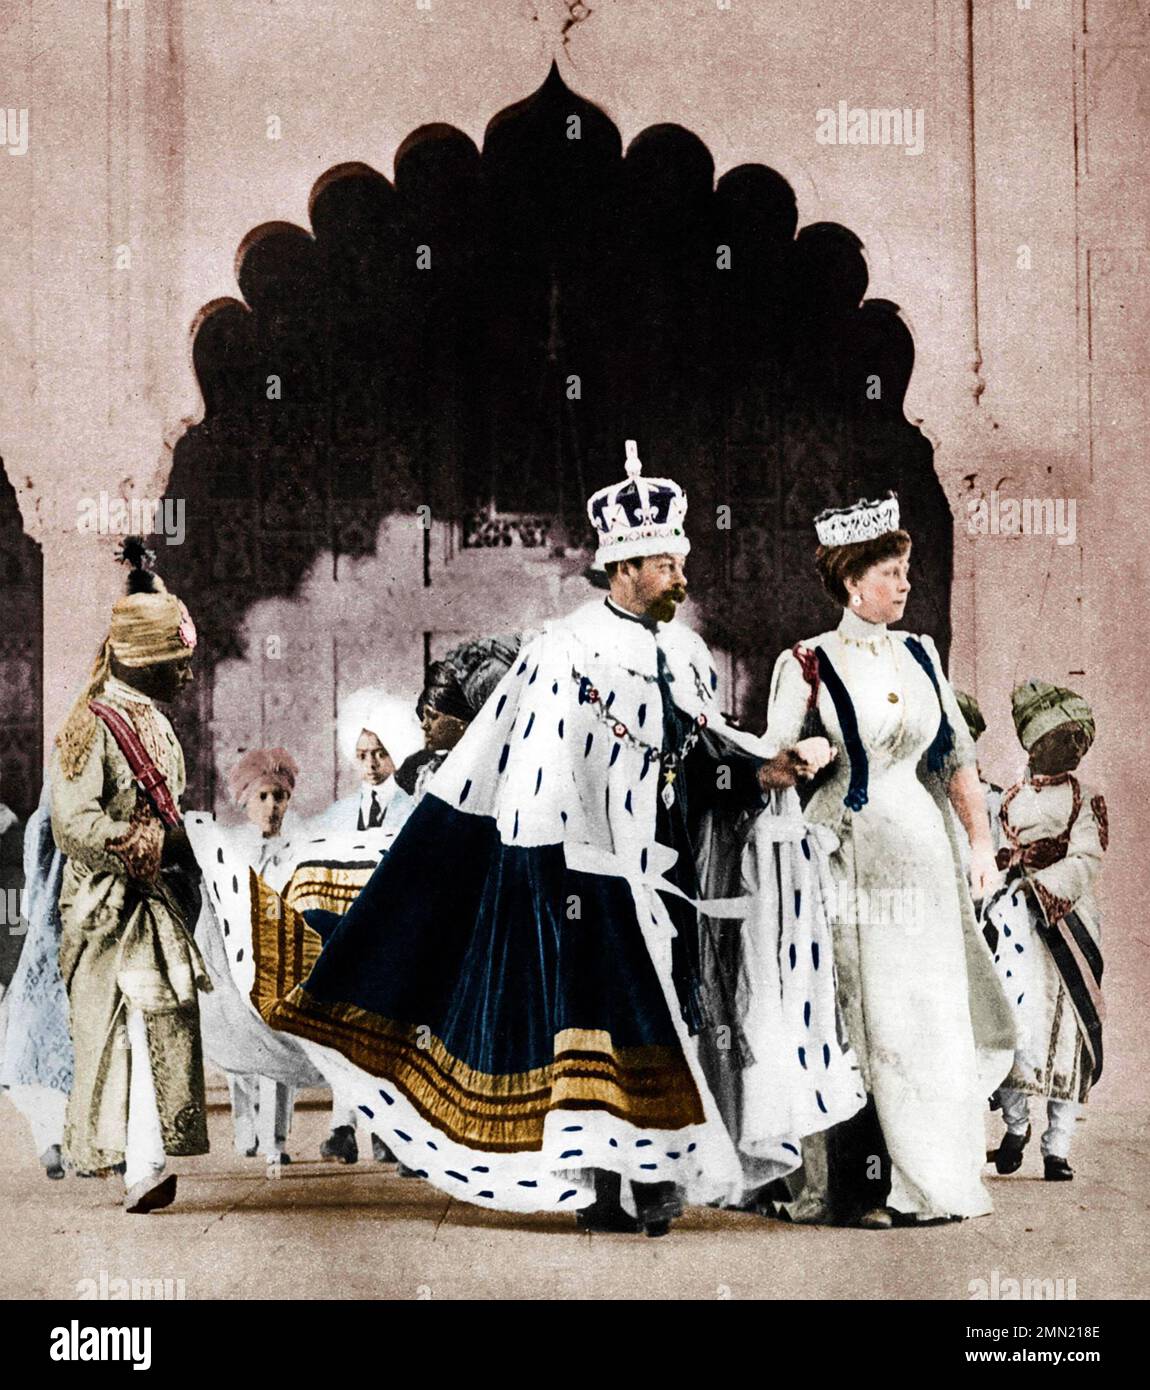 KING GEORGE VI with Queen Mary in Delhi in 1911 for the Durbar to celebrate their coronation. Colourised bw of unknown date. Stock Photo